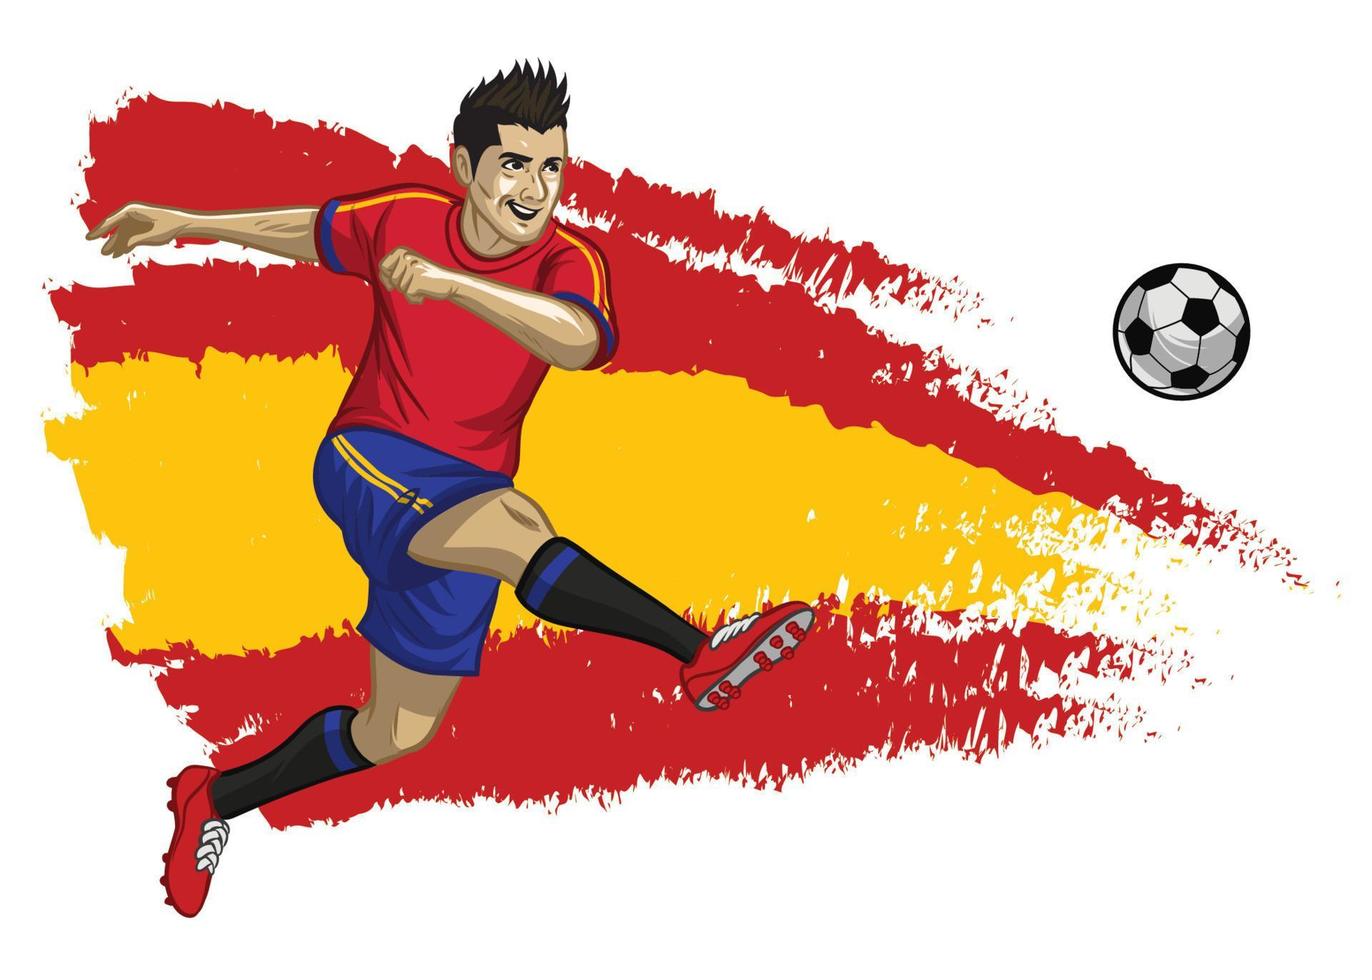 Spain soccer player with flag as a background vector